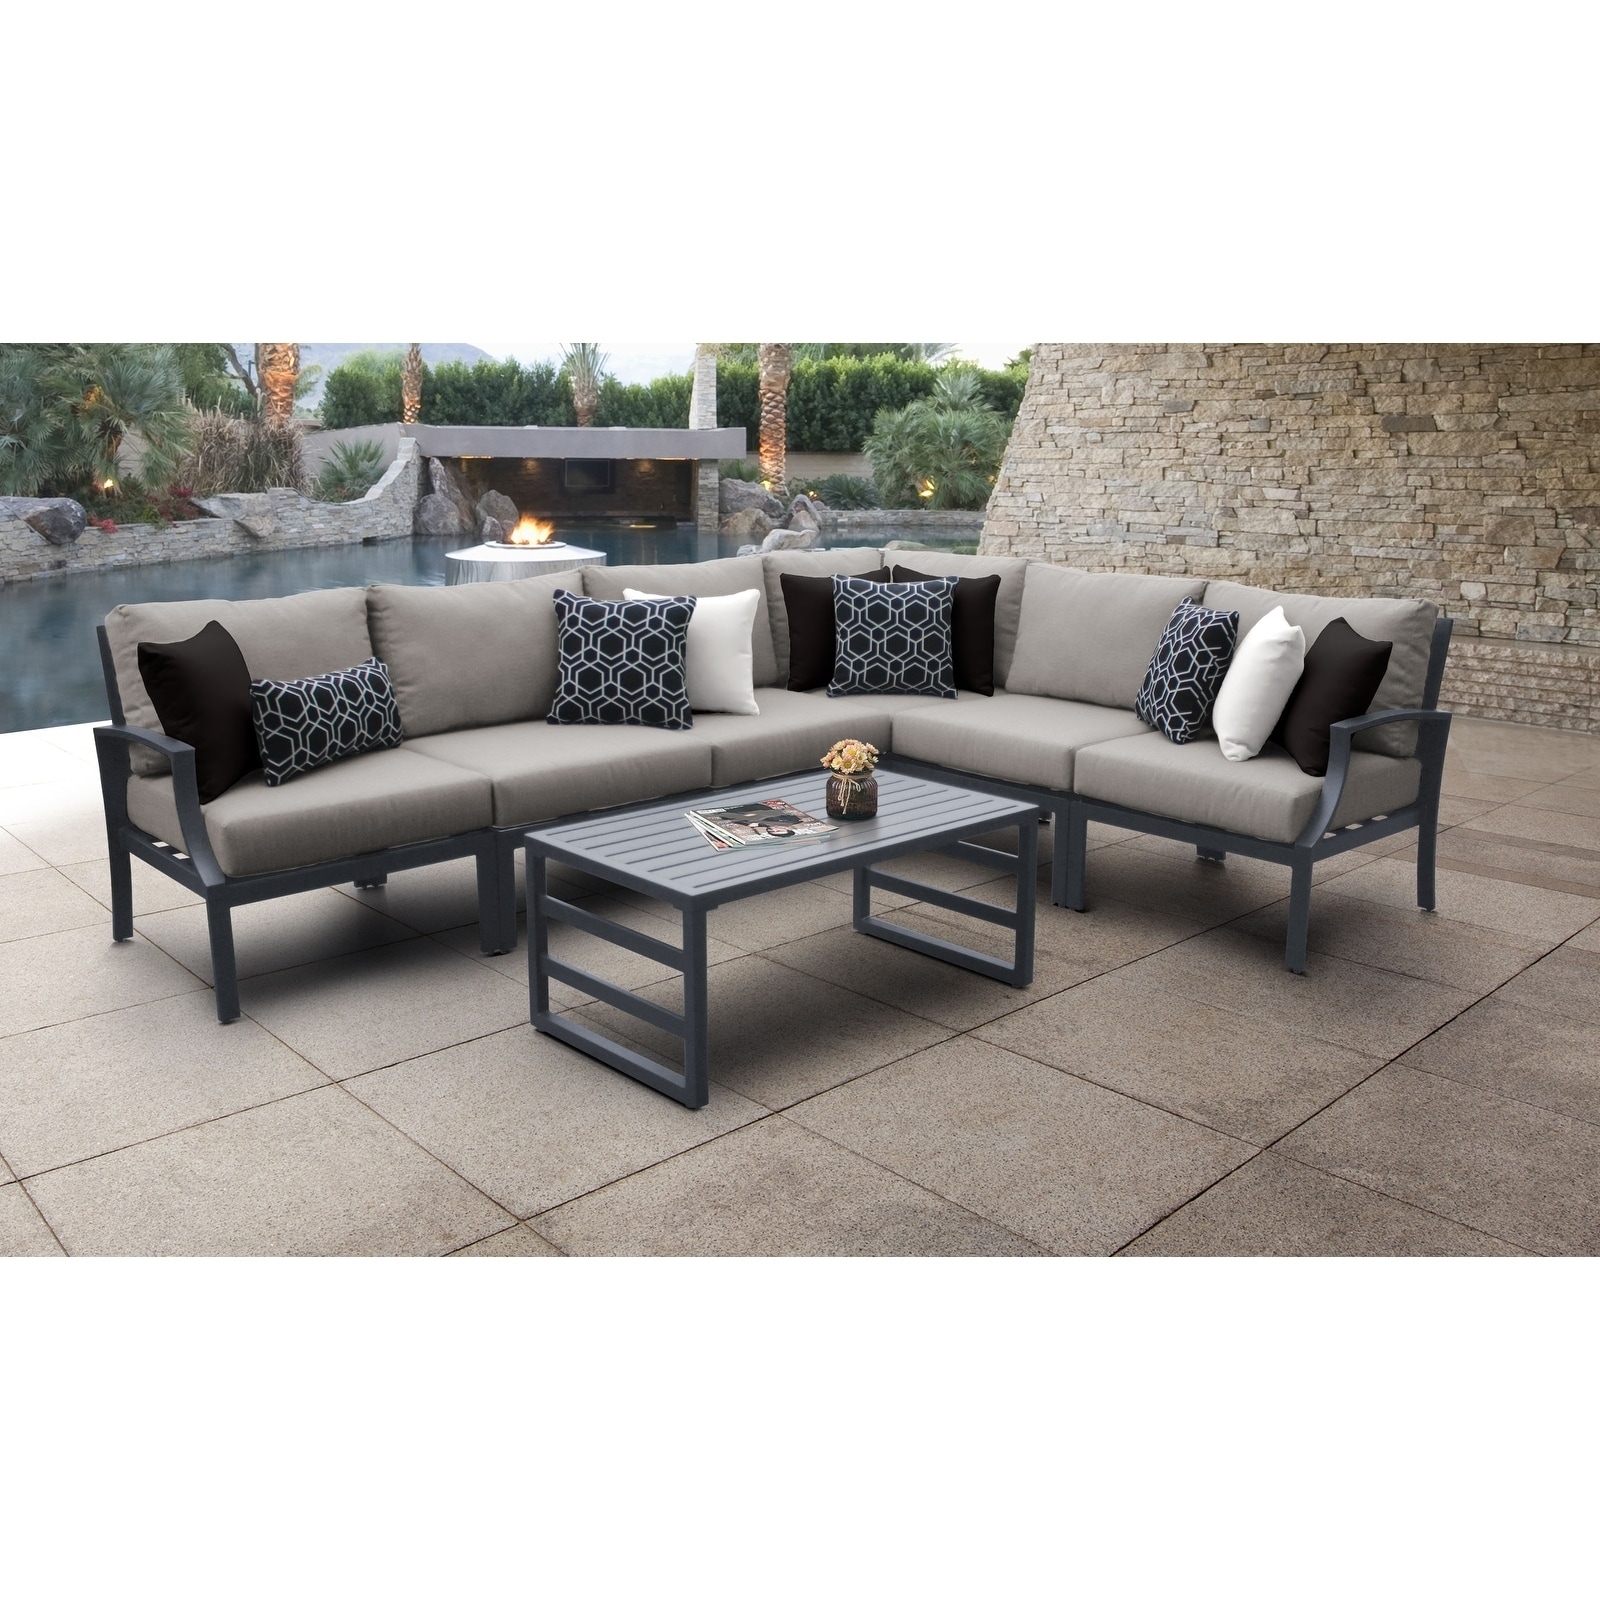 Moresby 7-piece Outdoor Aluminum Patio Furniture Set 07b By Havenside Home